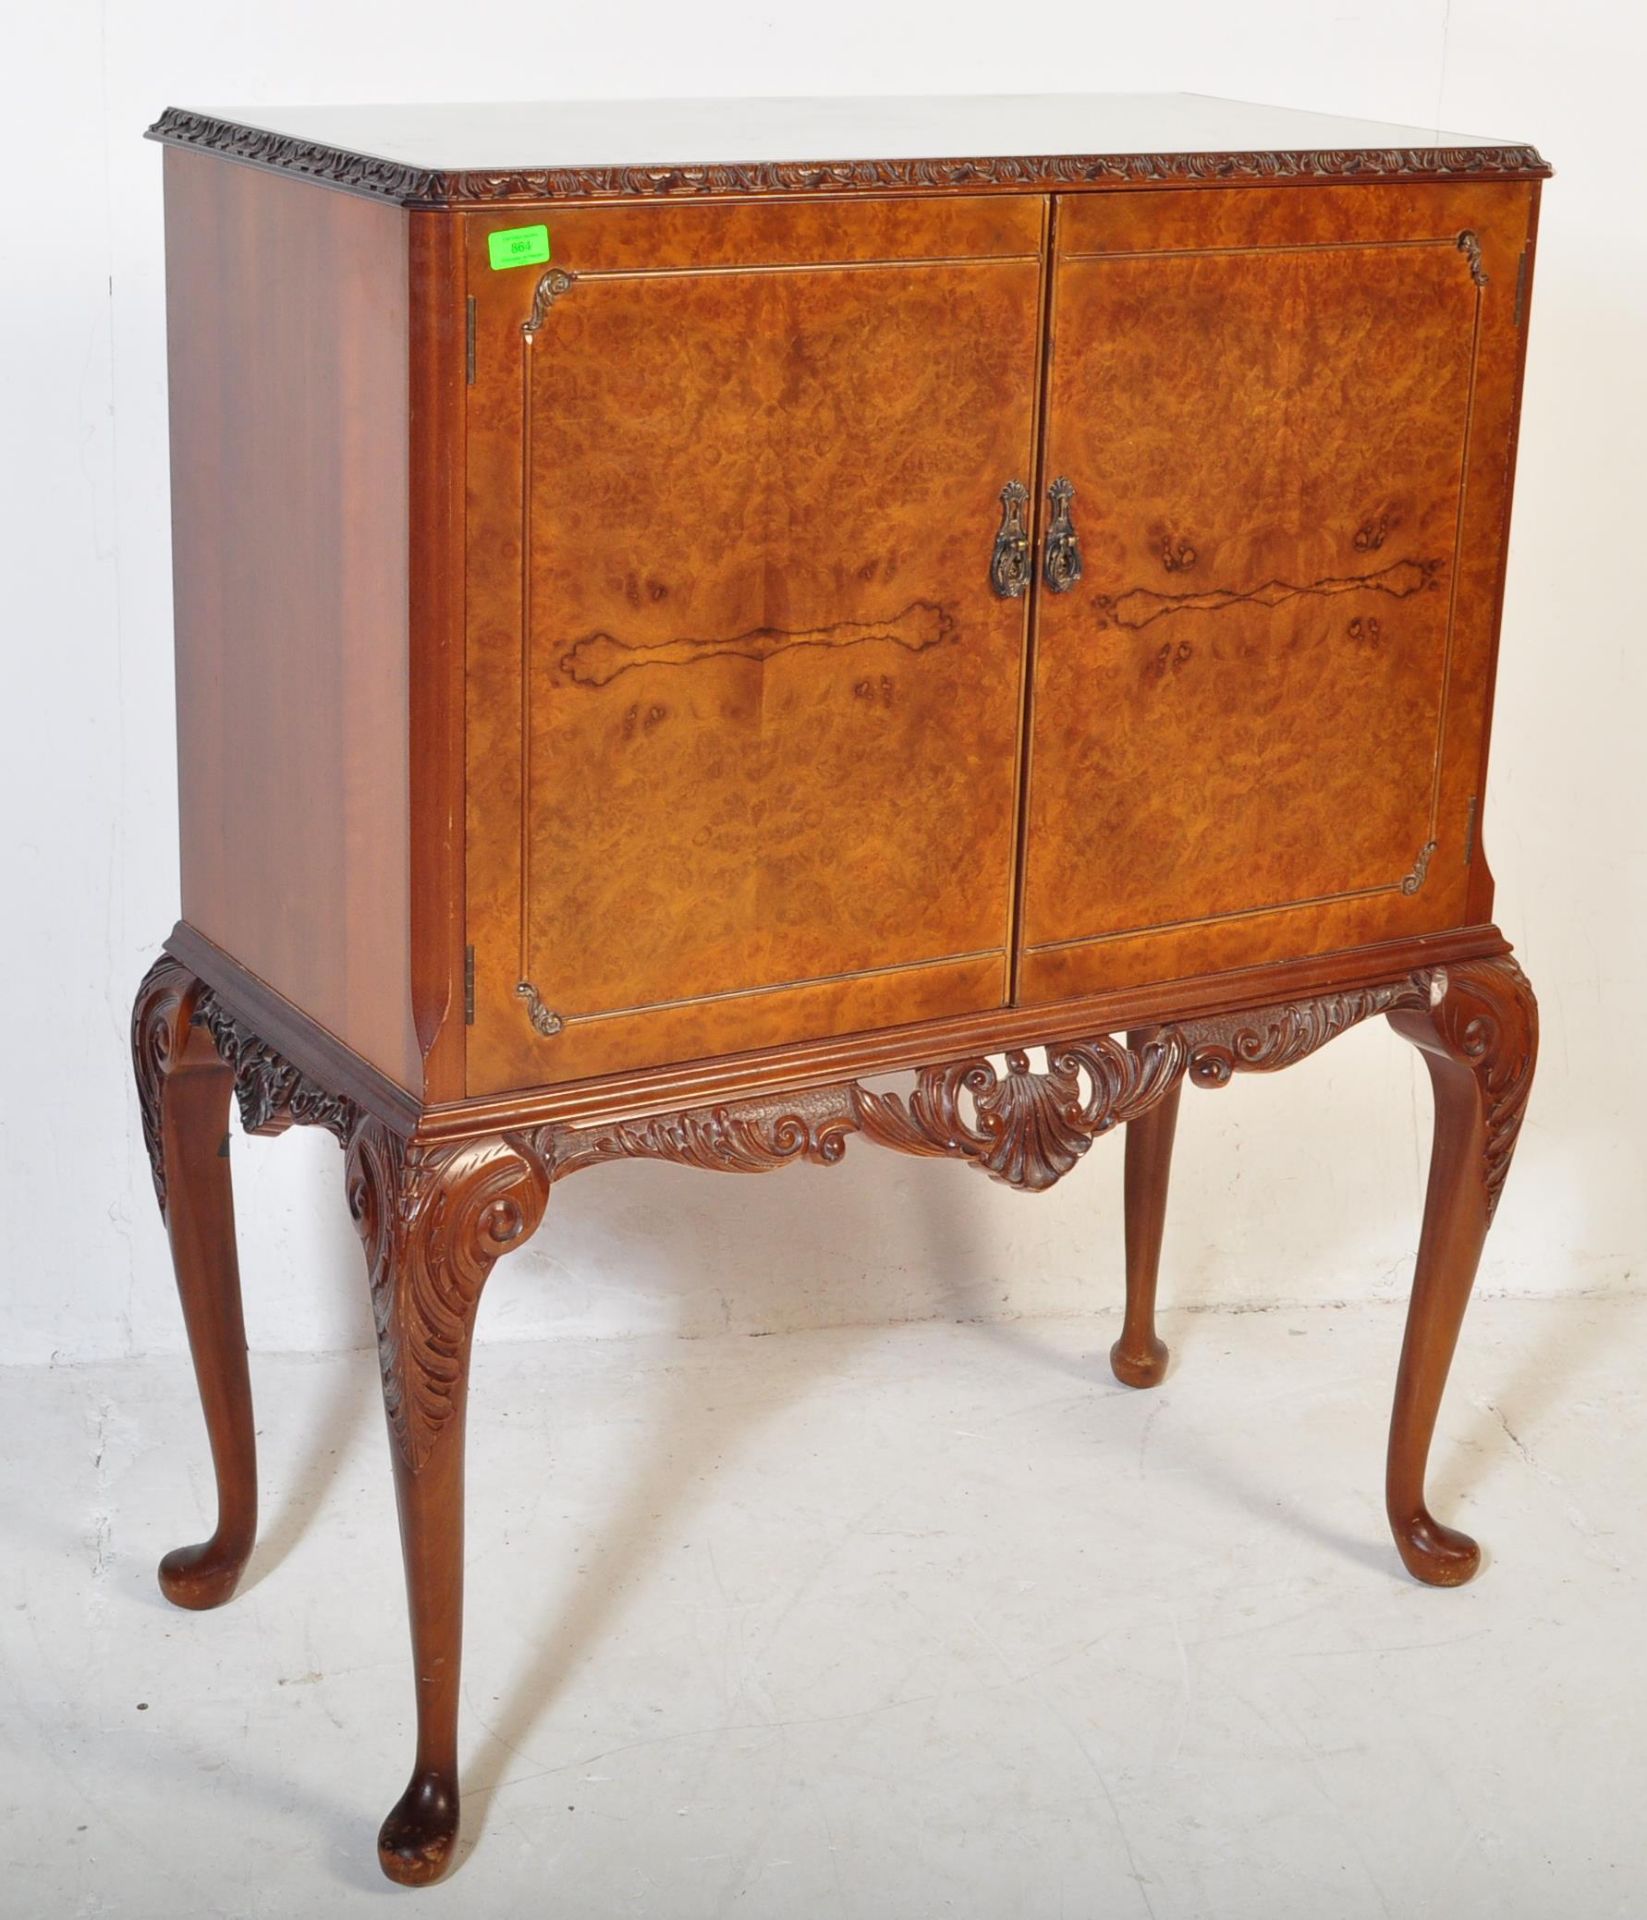 20TH CENTURY QUEEN ANNE REVIVAL WALNUT COCKTAIL CABINET - Image 2 of 7